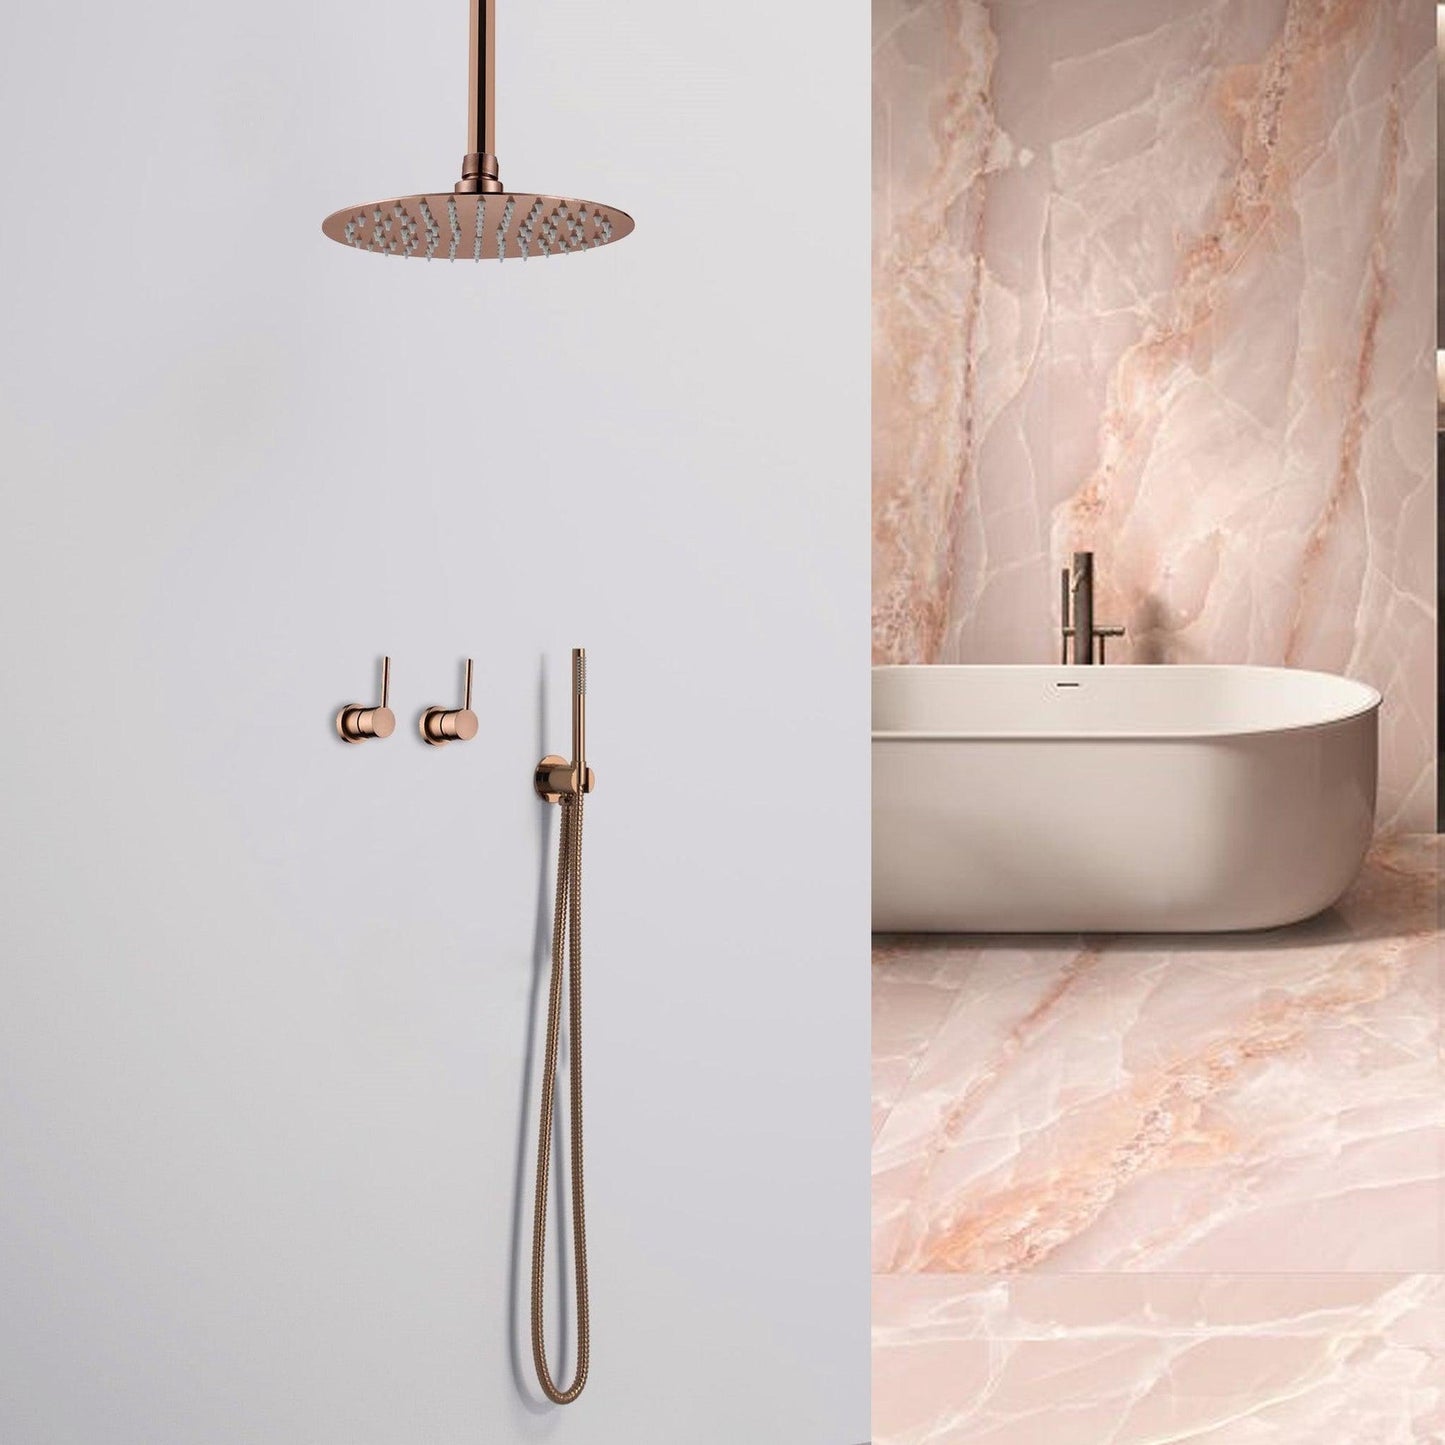 FontanaShowers Verona Creative Luxury Rose Gold Round Ceiling Mounted Solid Brass Shower Head Rainfall Shower System With Dual Mixer and Hand Shower